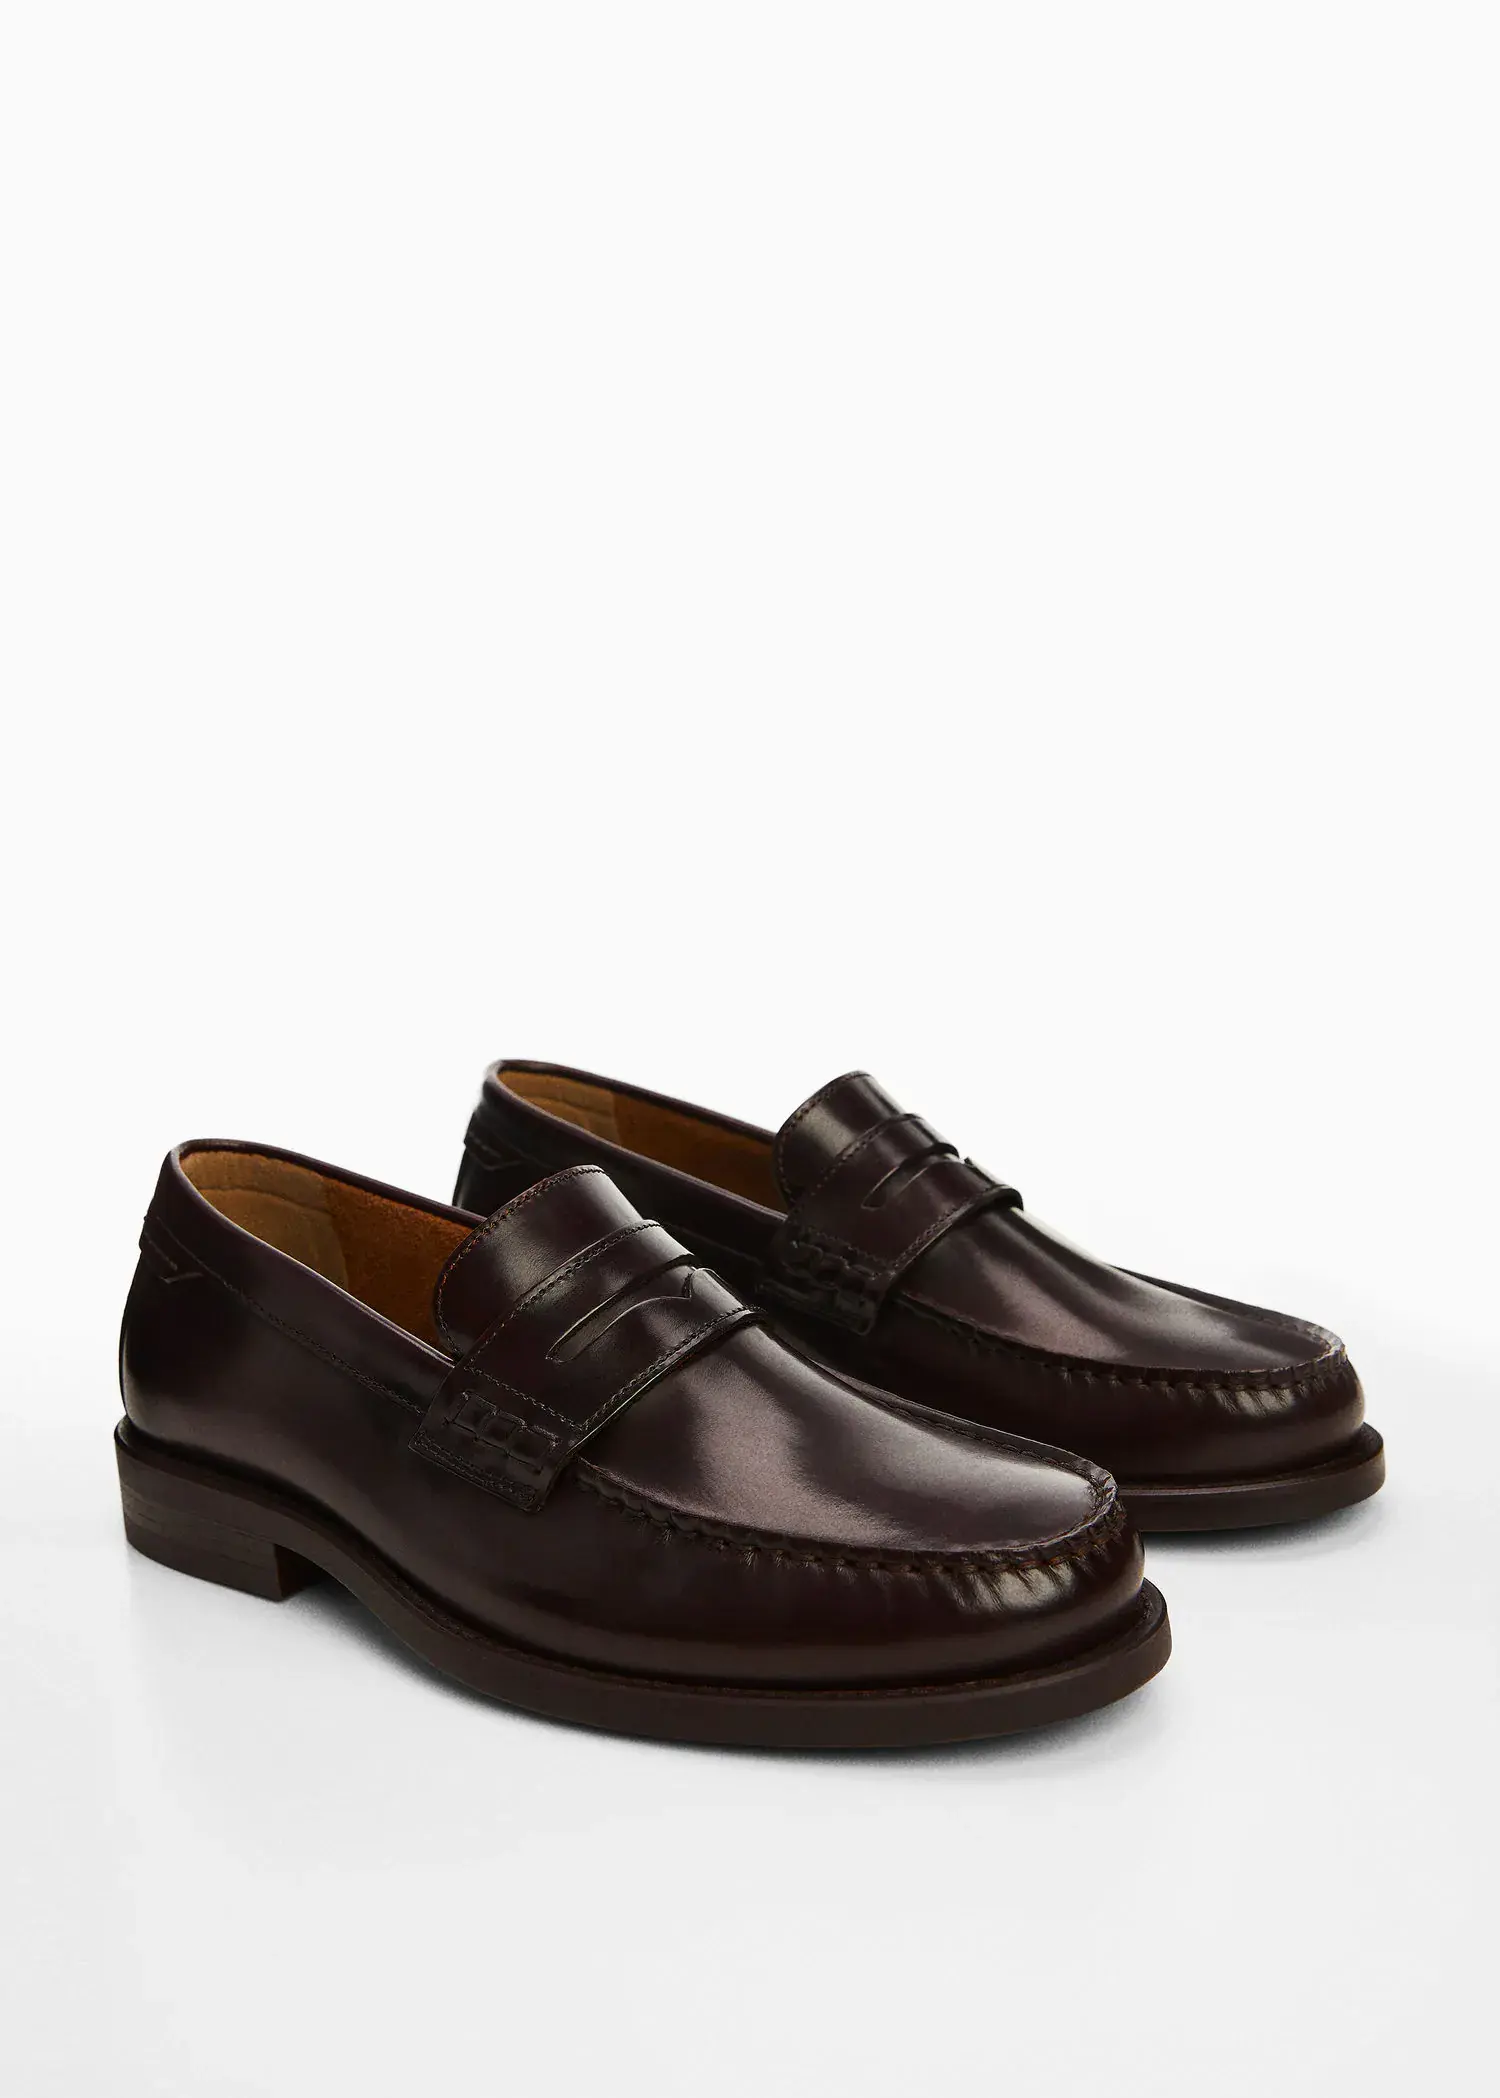 Mango Leather penny loafers. 3